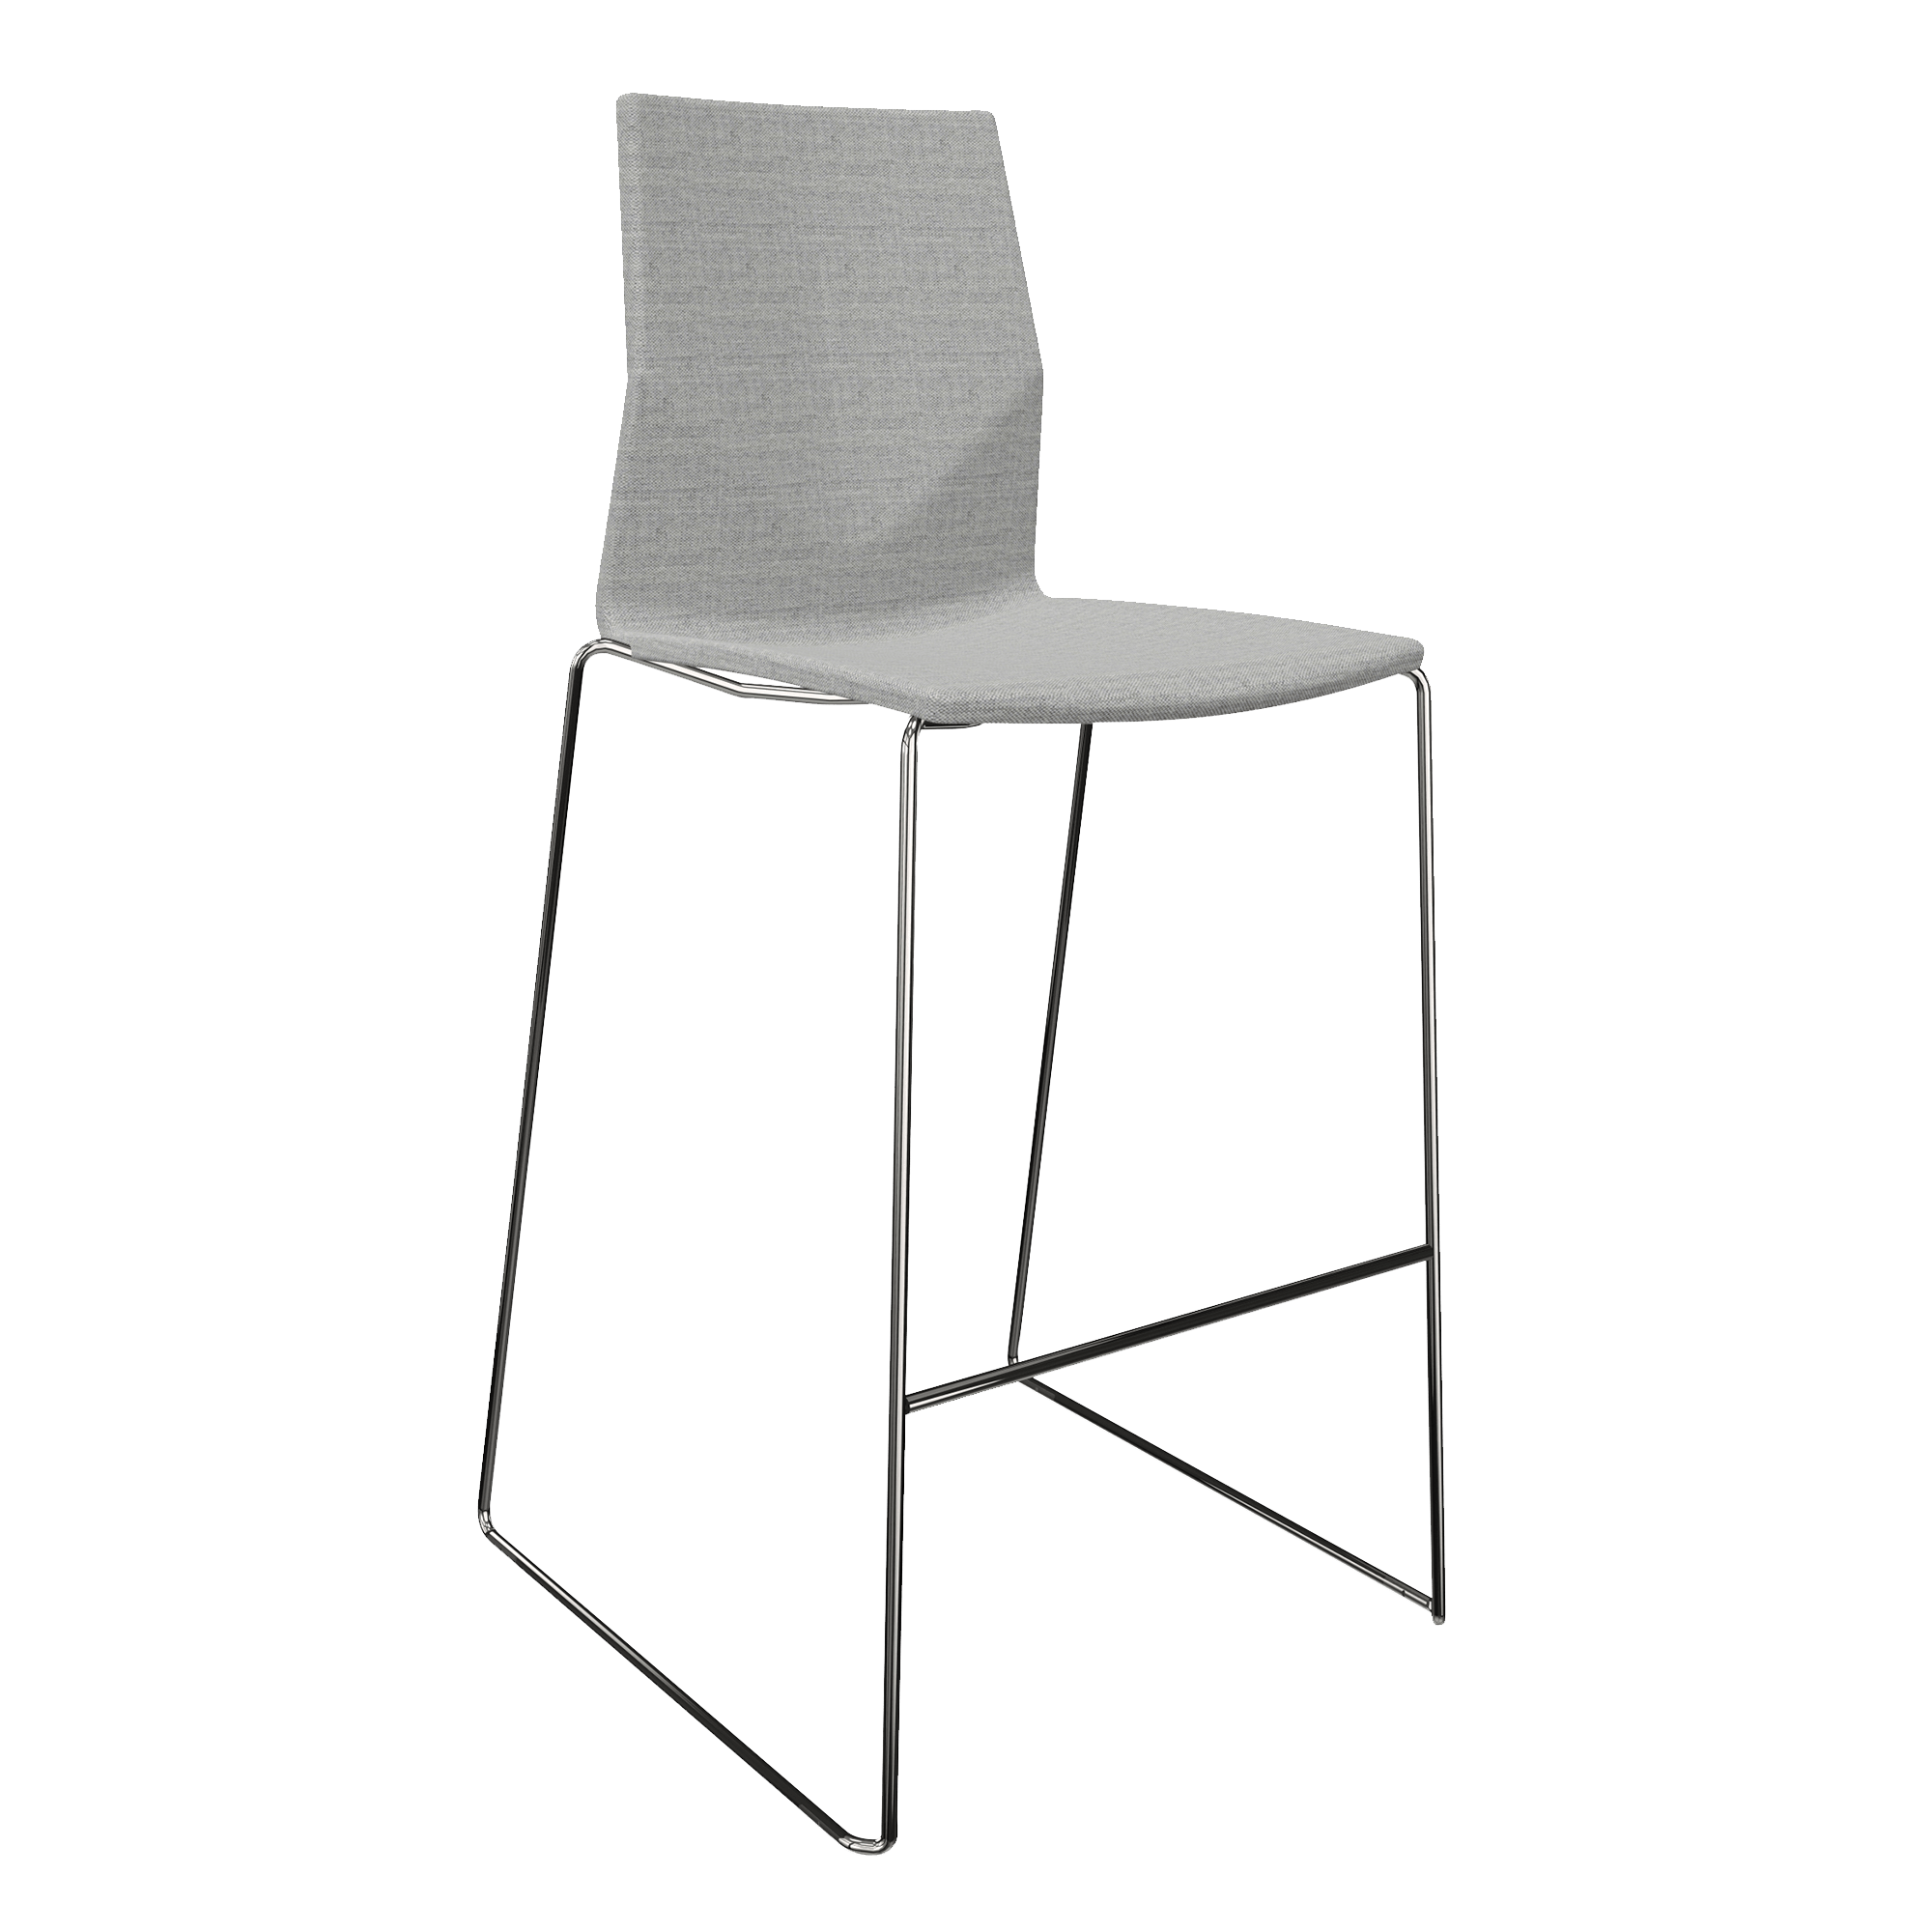 Counter chair with a grey seat and two chrome legs